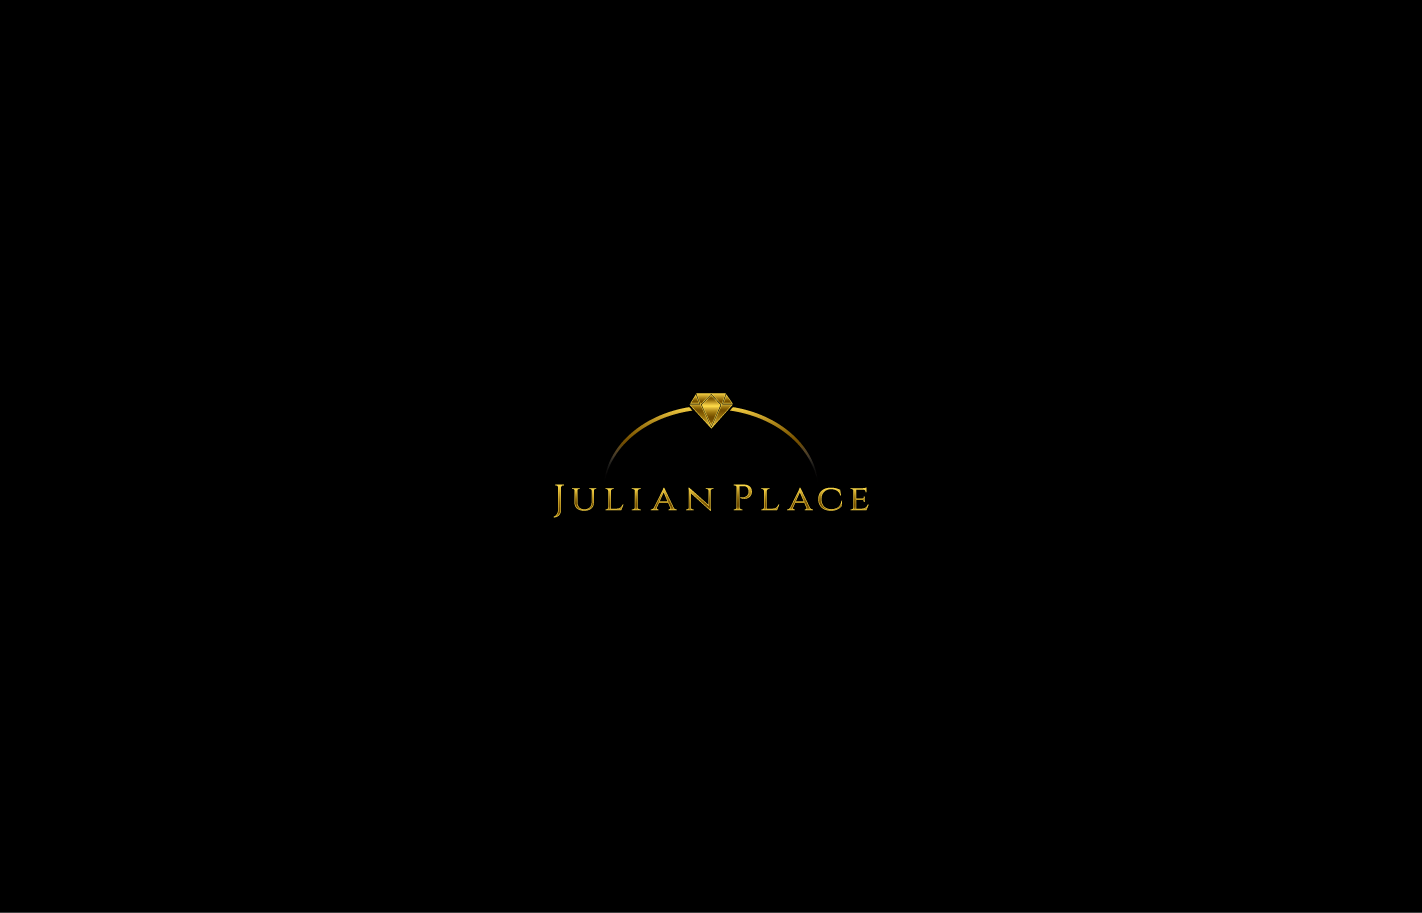 Gold Black and White Construction Logo - Serious, Professional, Construction Logo Design for Julian Place